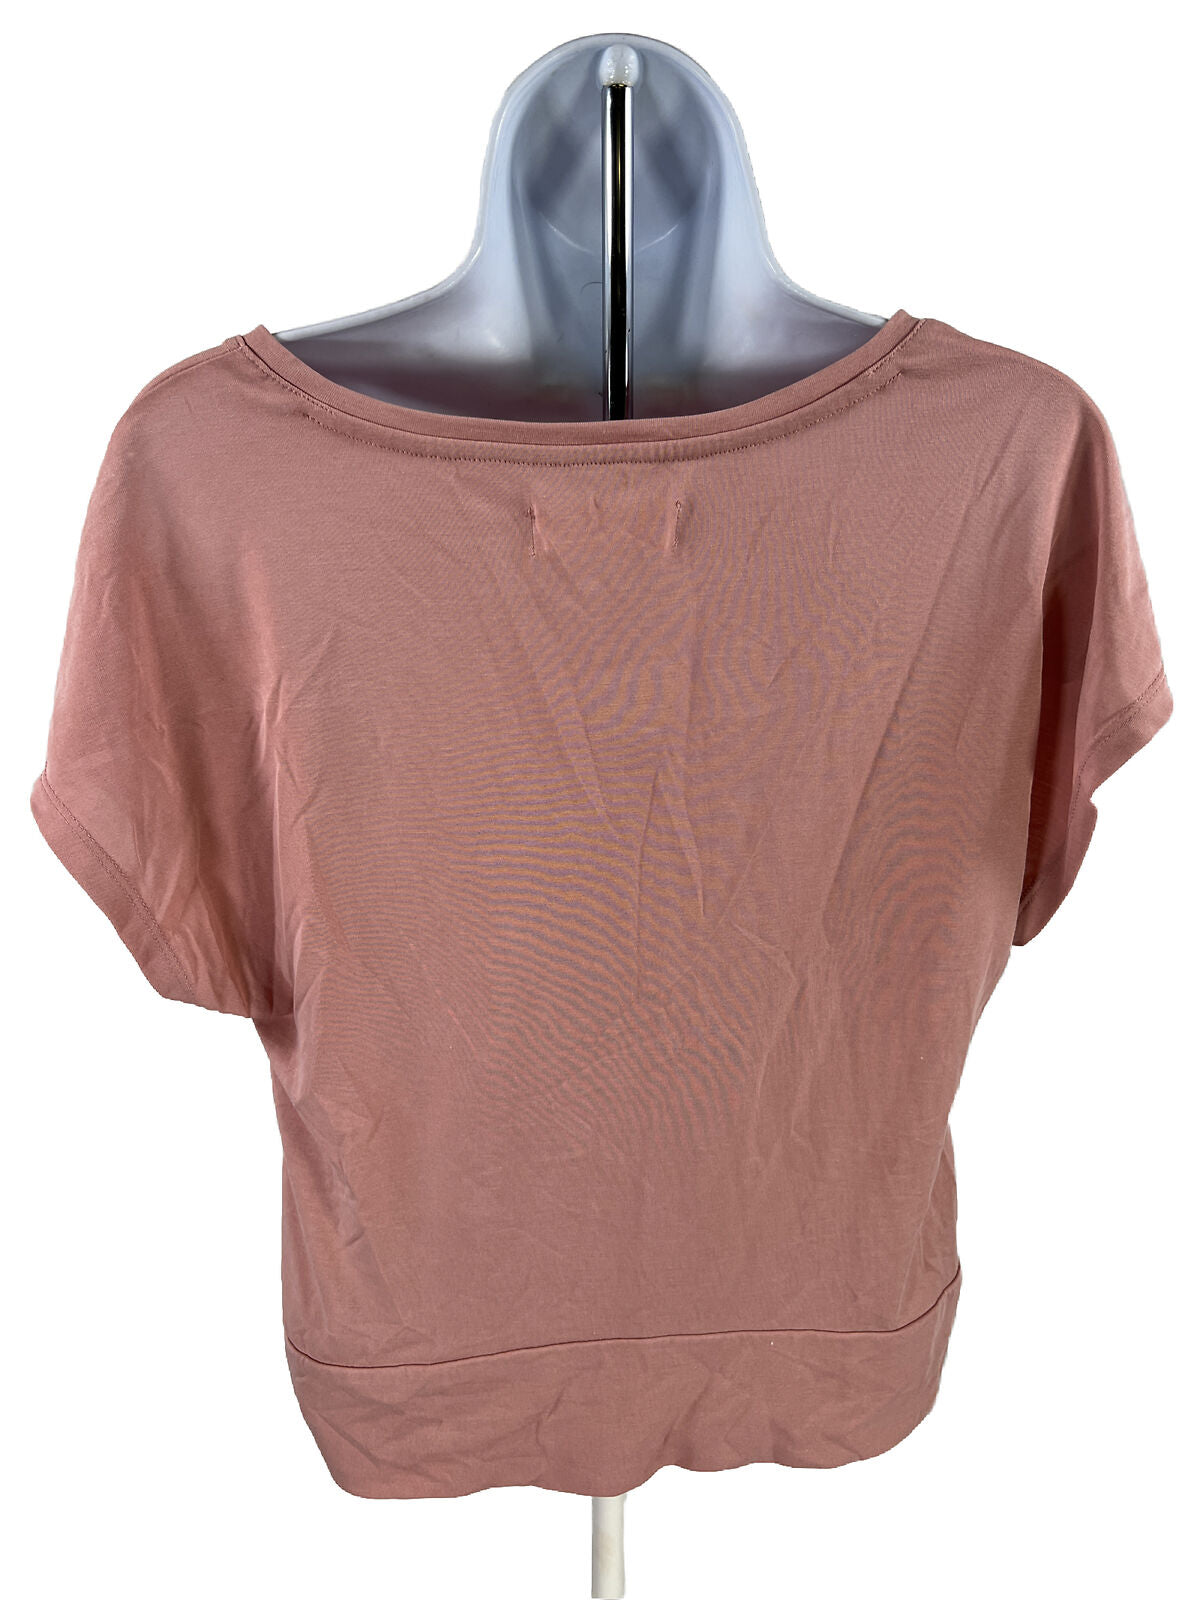 Lucky Brand Women's Pink Knotted Front T-Shirt - XS